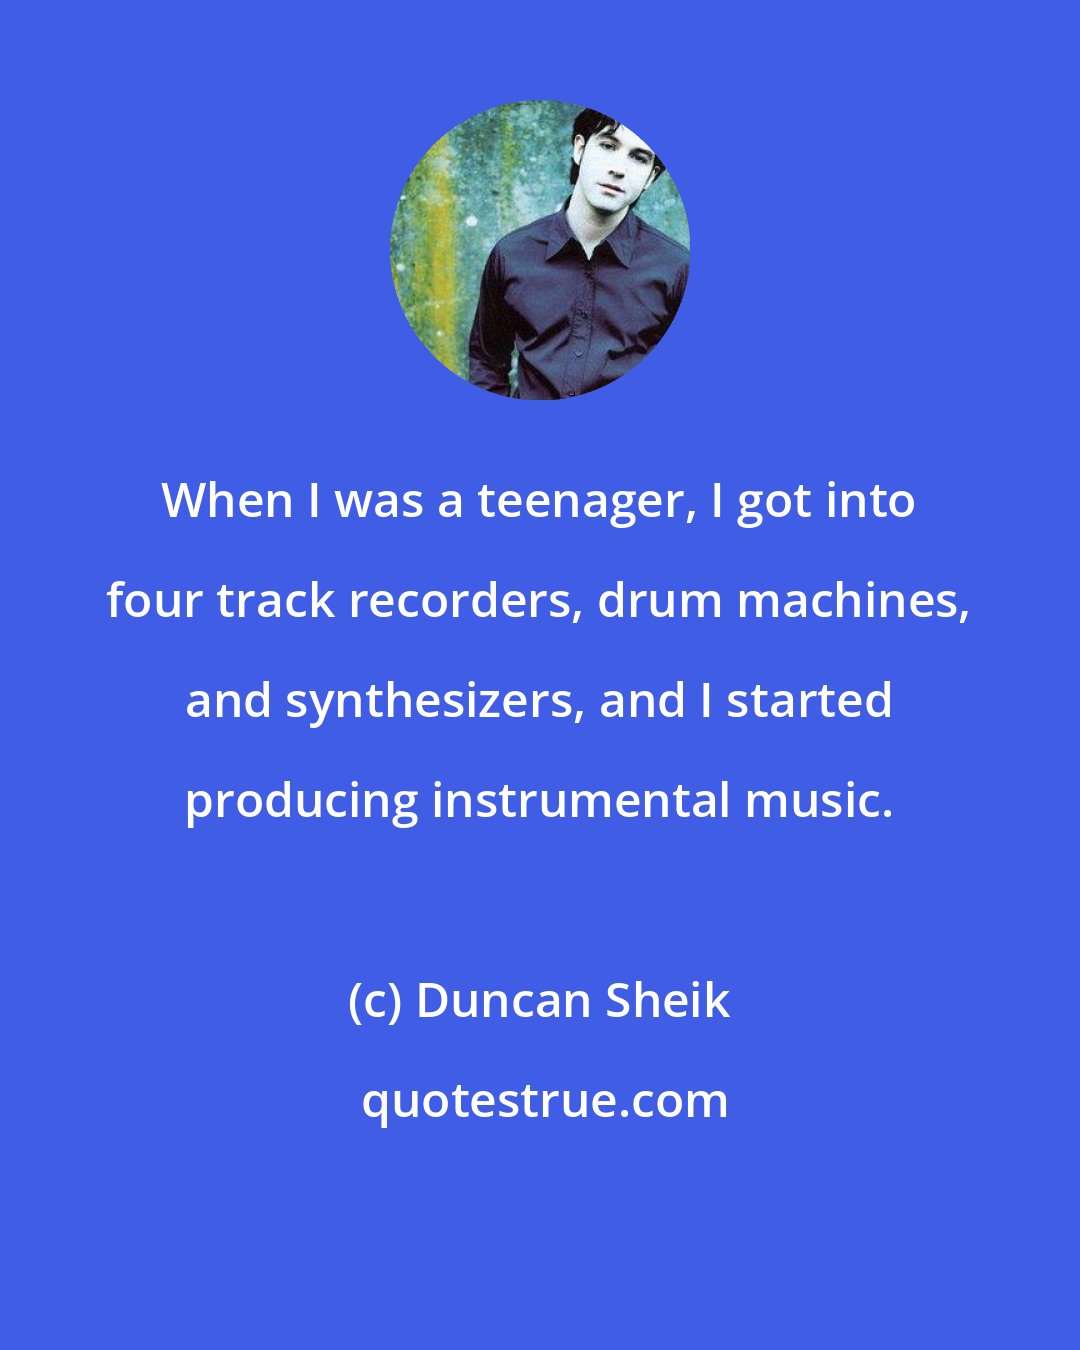 Duncan Sheik: When I was a teenager, I got into four track recorders, drum machines, and synthesizers, and I started producing instrumental music.